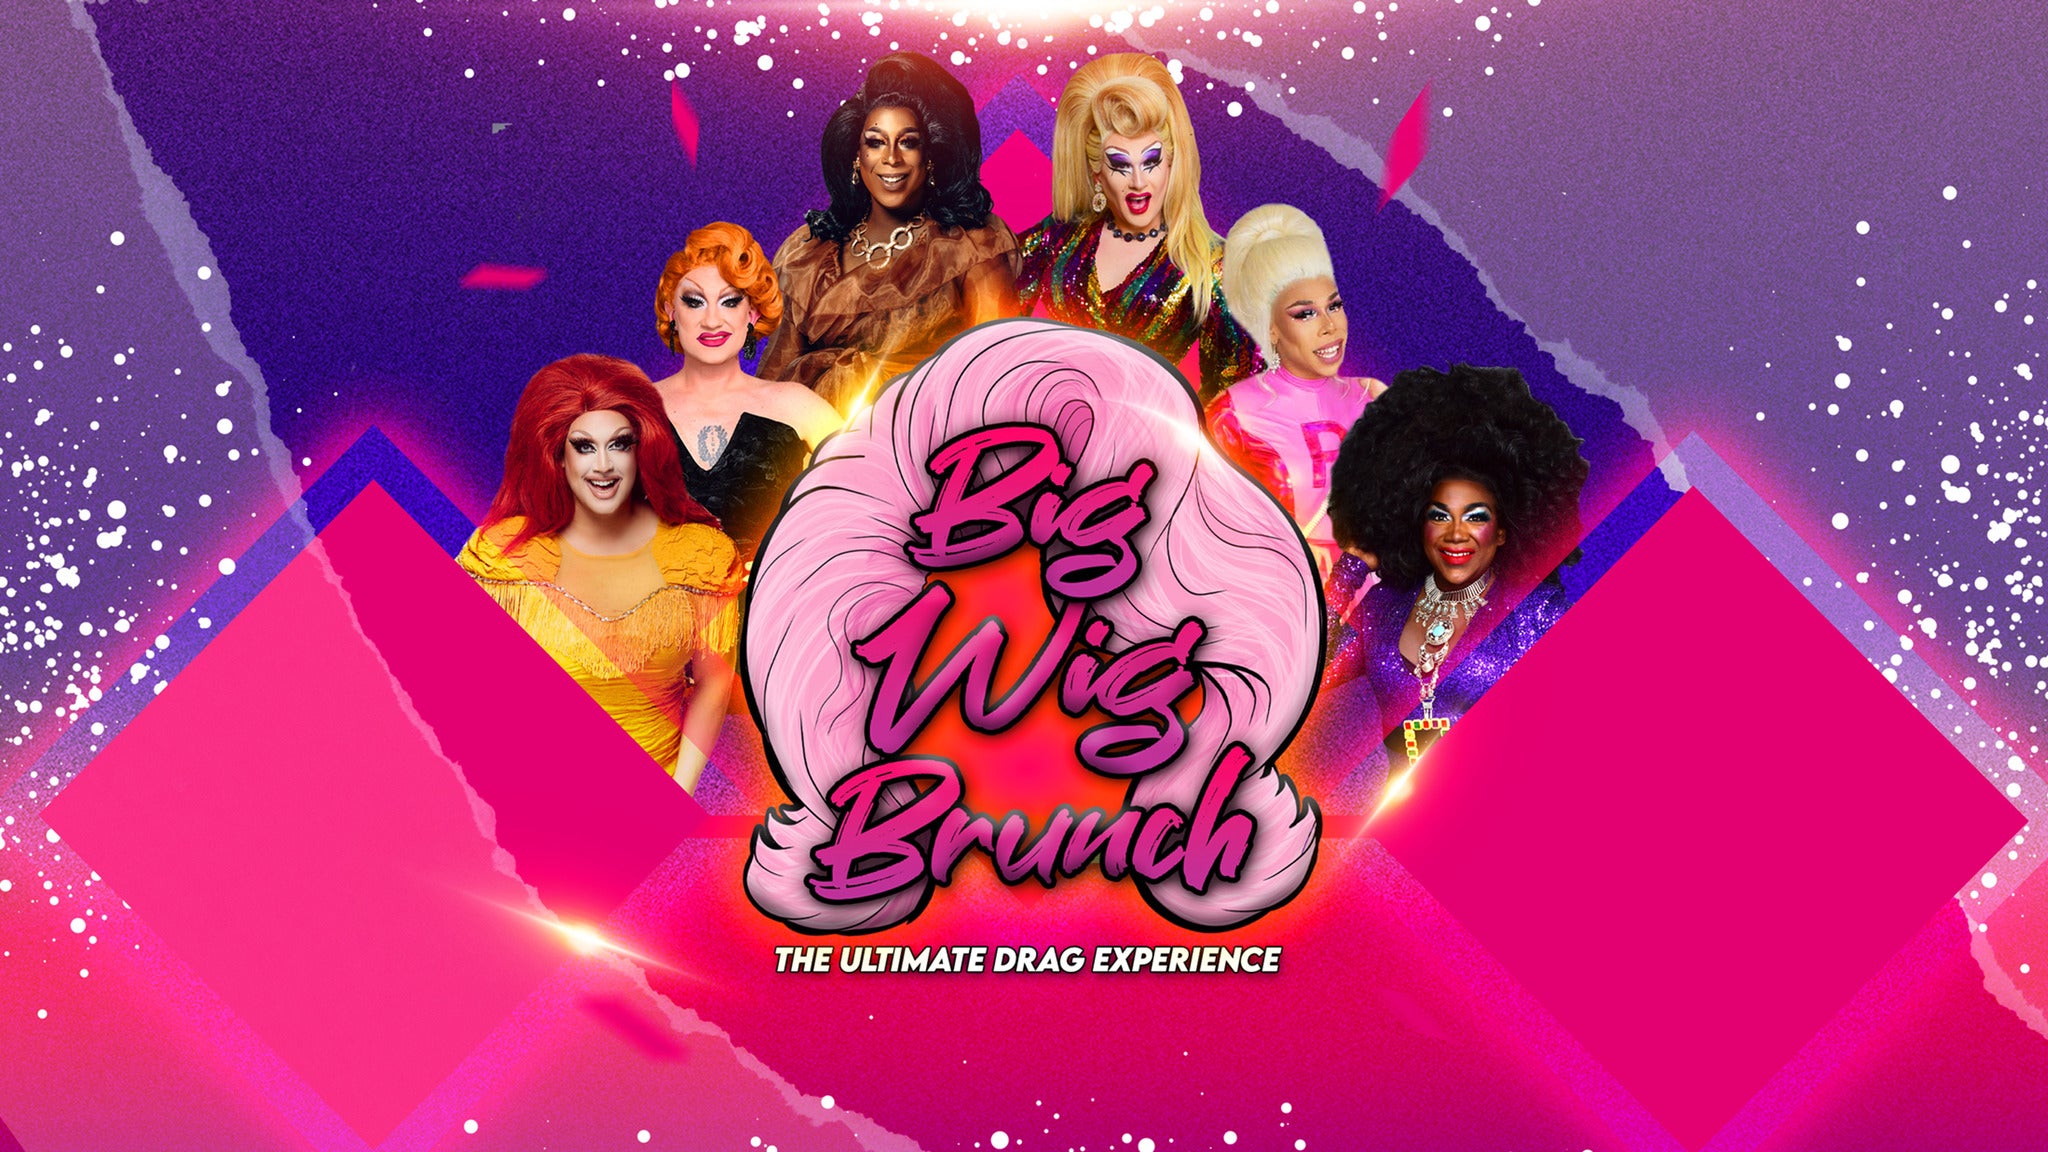 Big Wig Disco Brunch: The Ultimate Drag Experience